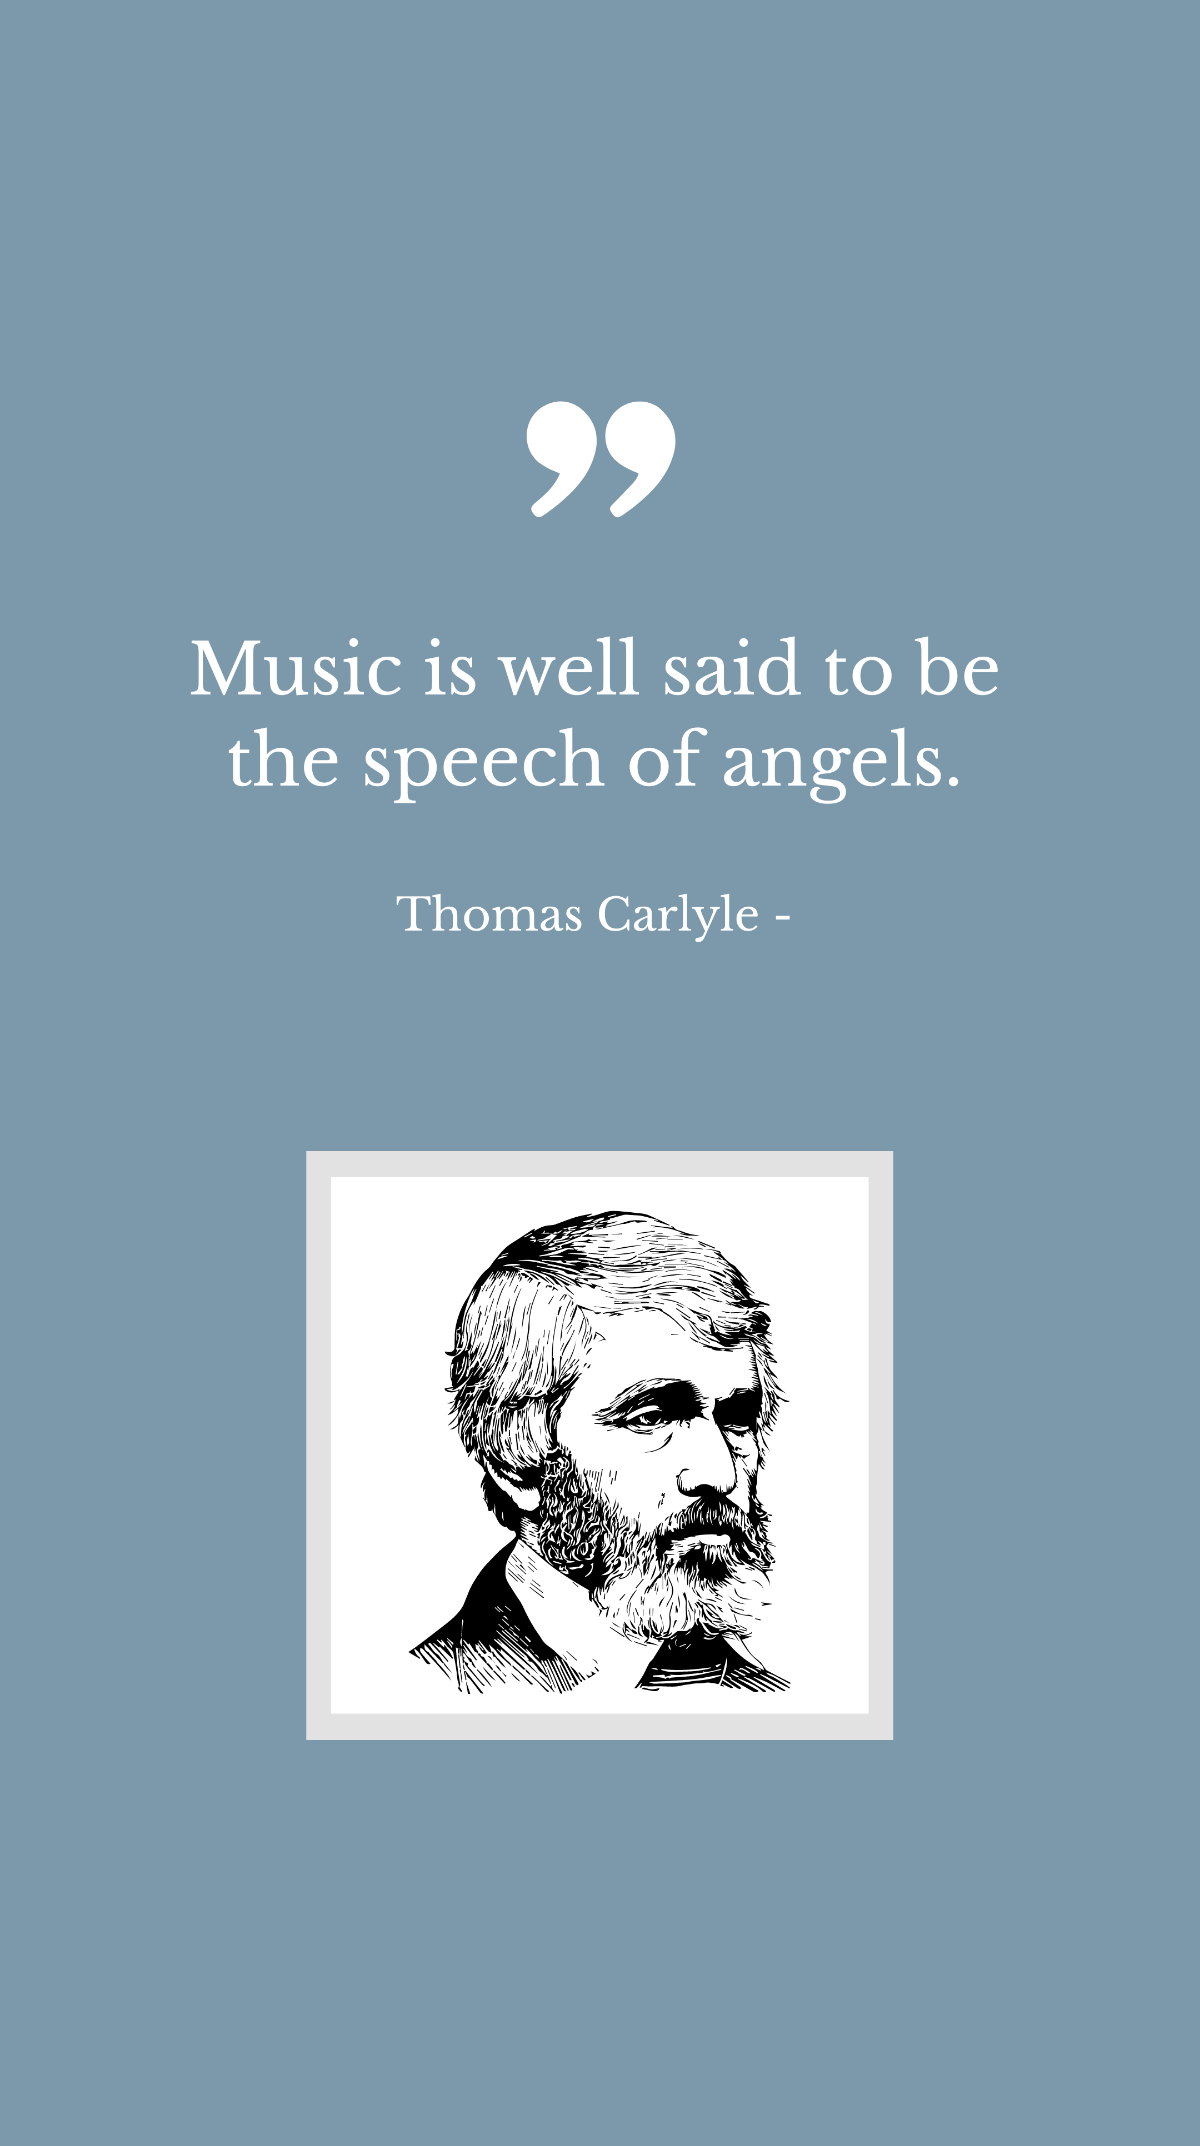 Thomas Carlyle - Music is well said to be the speech of angels. Template